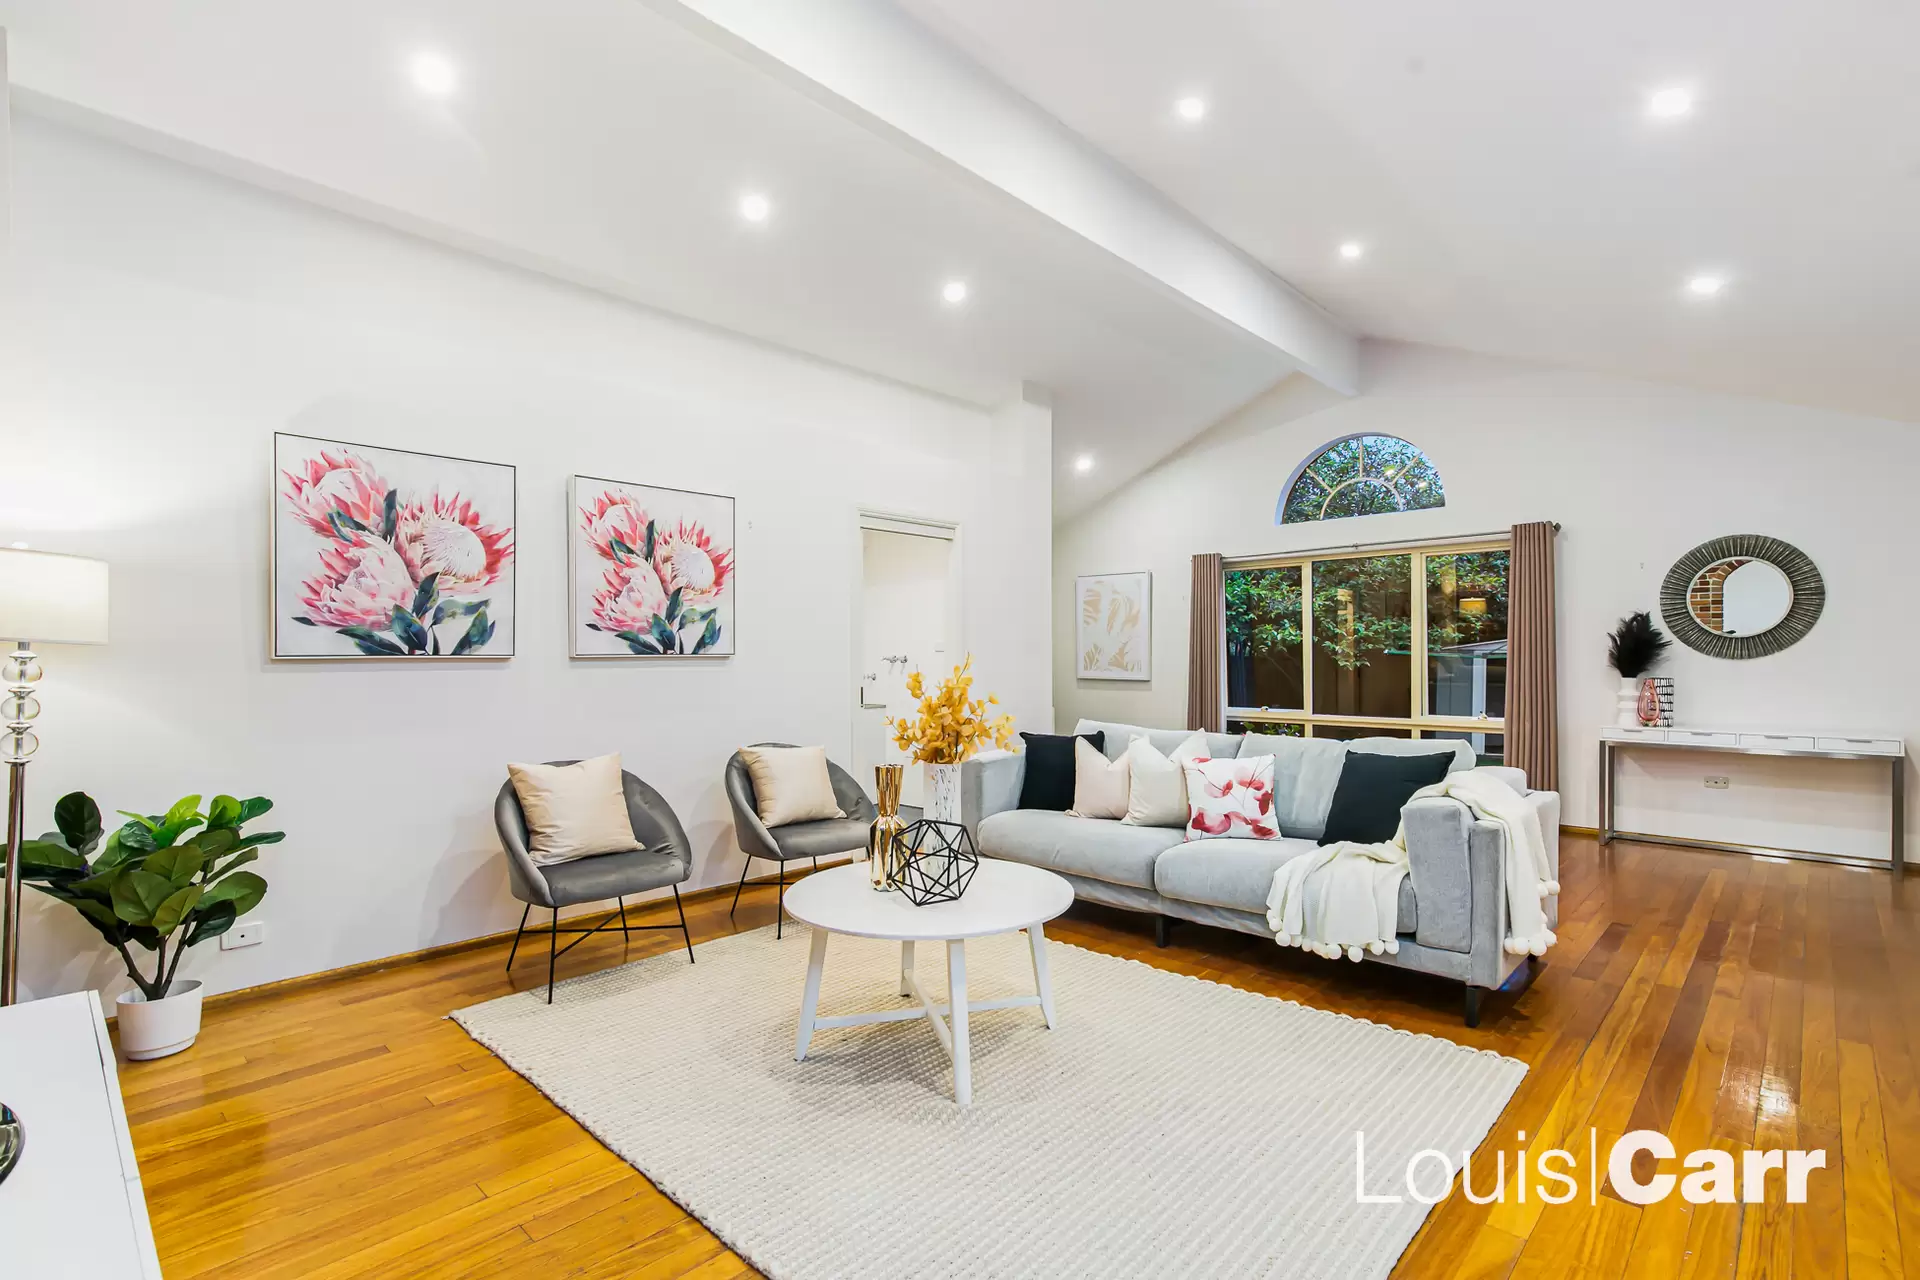 Photo #9: 37 Darlington Drive, Cherrybrook - Sold by Louis Carr Real Estate